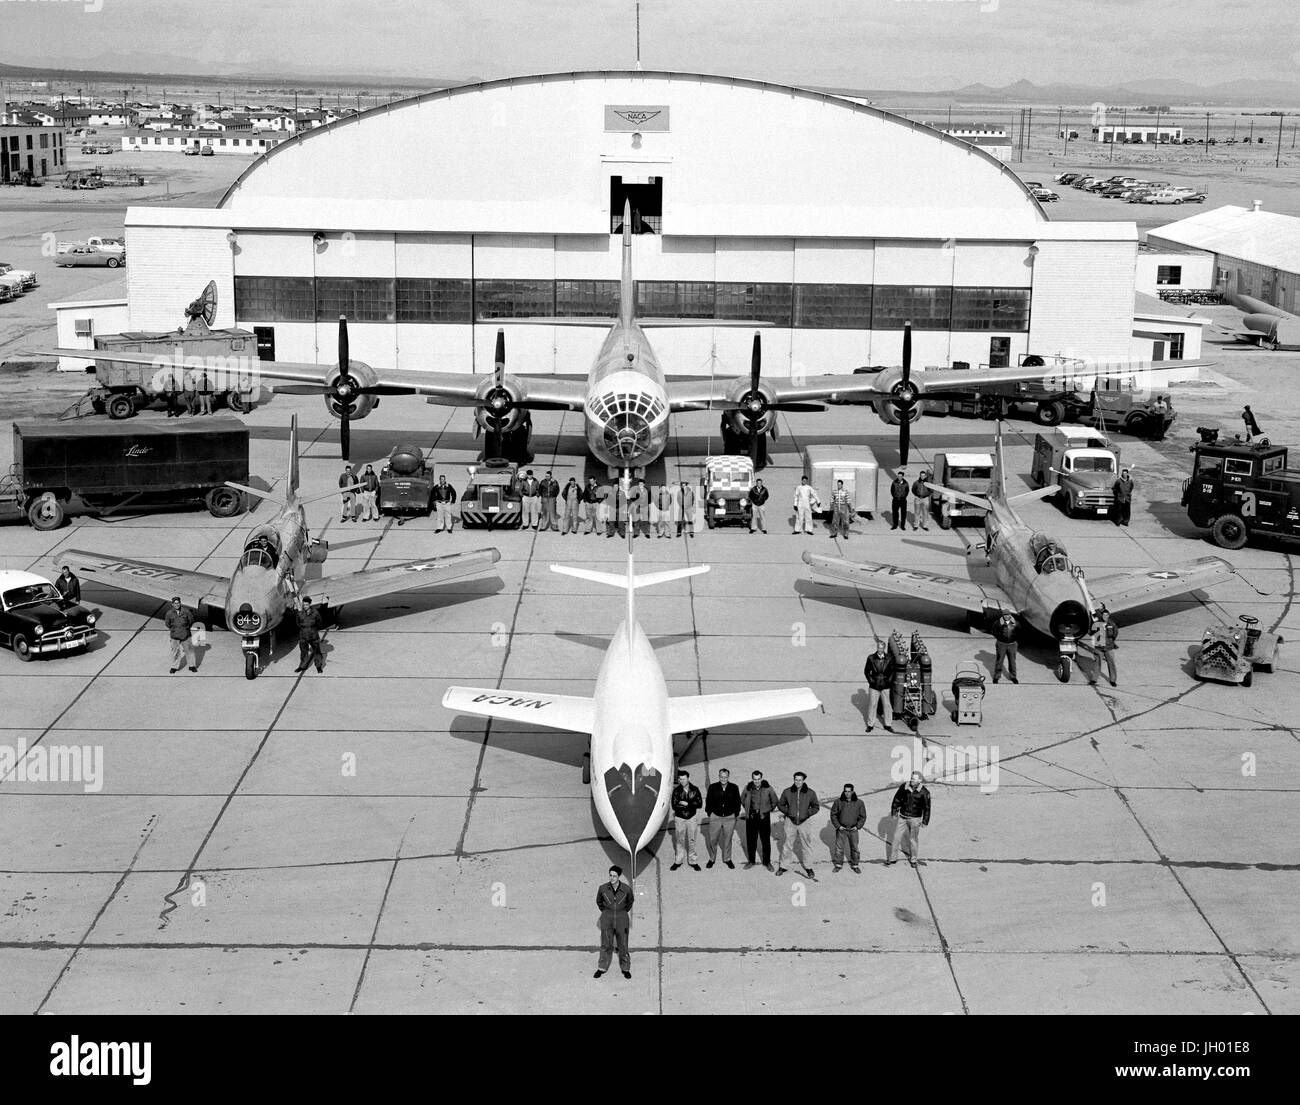 The fleet of NACA test aircraft are assembled in front of the hangar at the High Speed Flight Station, (later renamed the Dryden Flight Research Center) in Edwards, California. The white aircraft in the foreground is a Douglas Aircraft D-558-2 Skyrocket. To its left and right are North American F-86 Sabre chase aircraft. Directly behind the D-558-2 is the P2B-1 Superfortress, (the Navy version of the Air Force B-29). Also known as the 'mothership,' the P2B-1 carried aloft the D-558-2 Skyrocket under its fuselage. Once reaching altitude, the D-558-2 was released from the 'mothership' Stock Photo